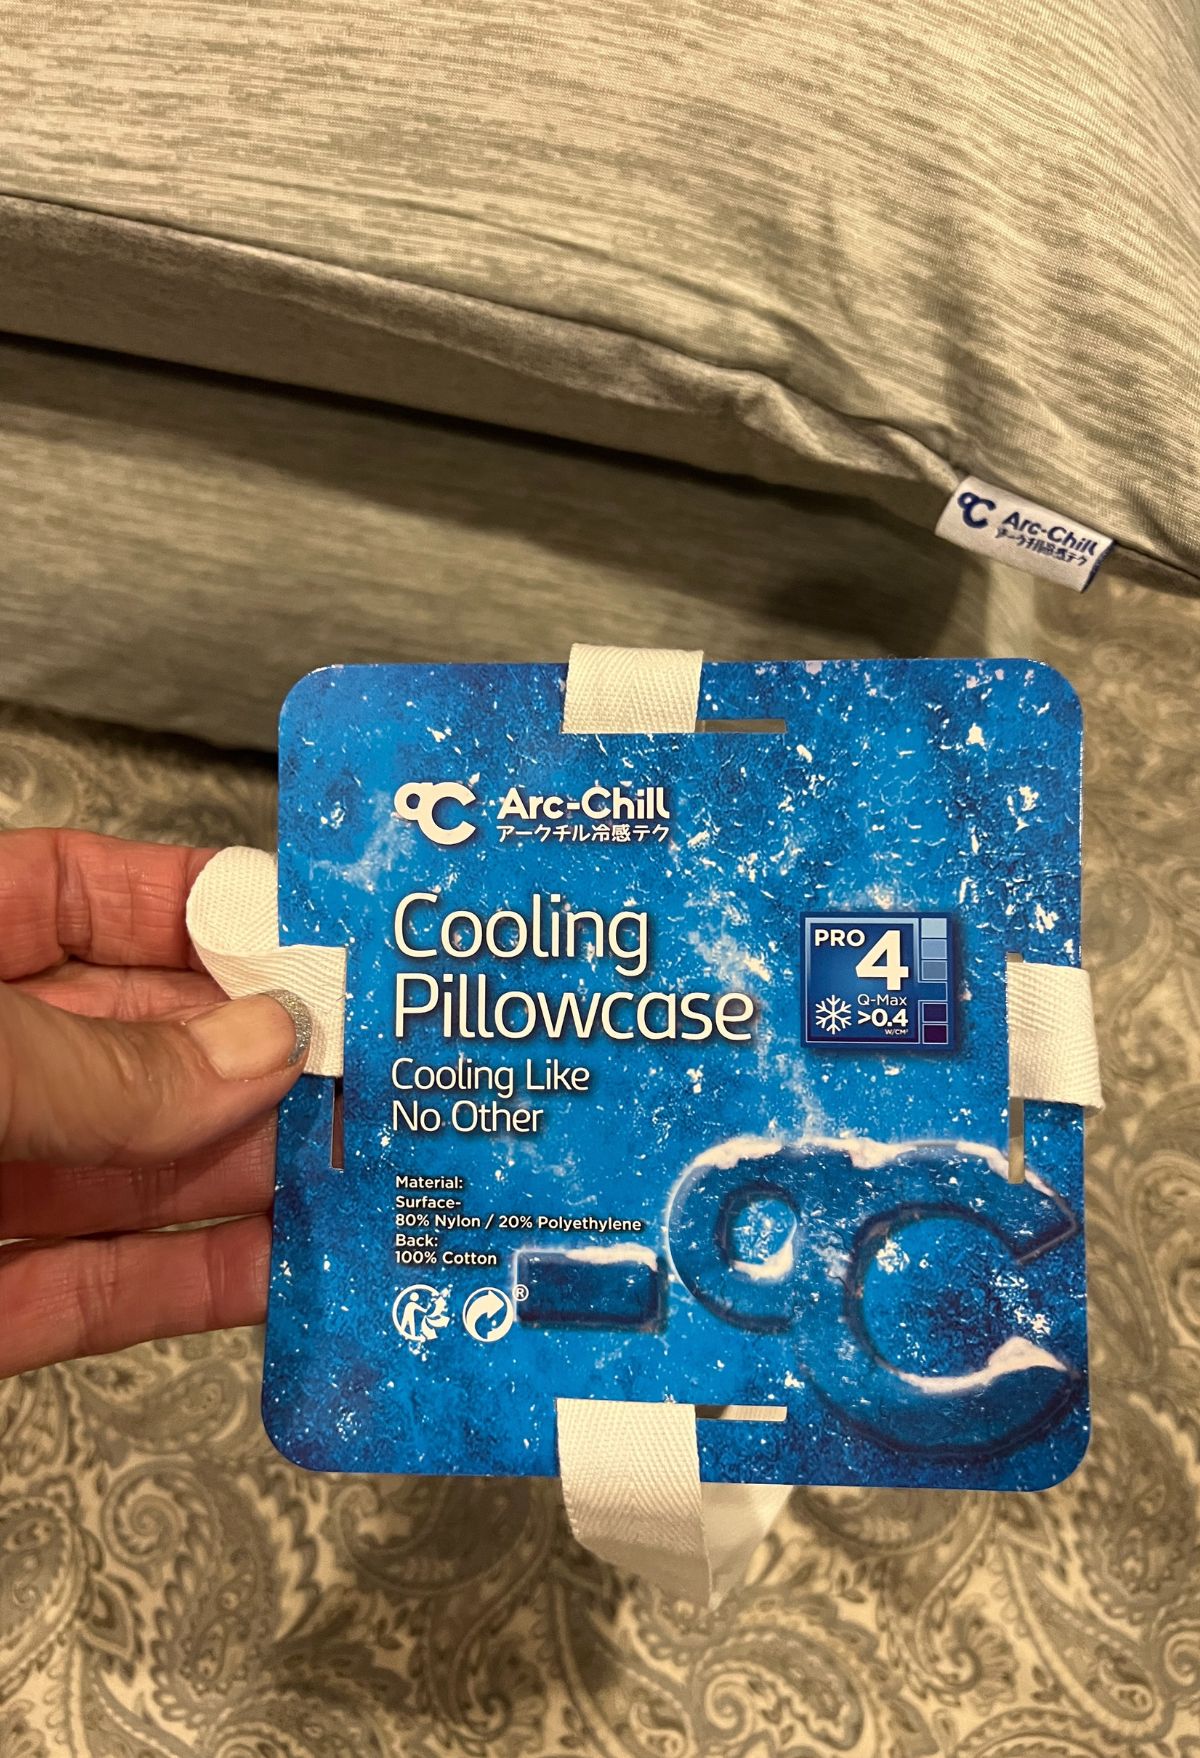 Cooling pillowcases